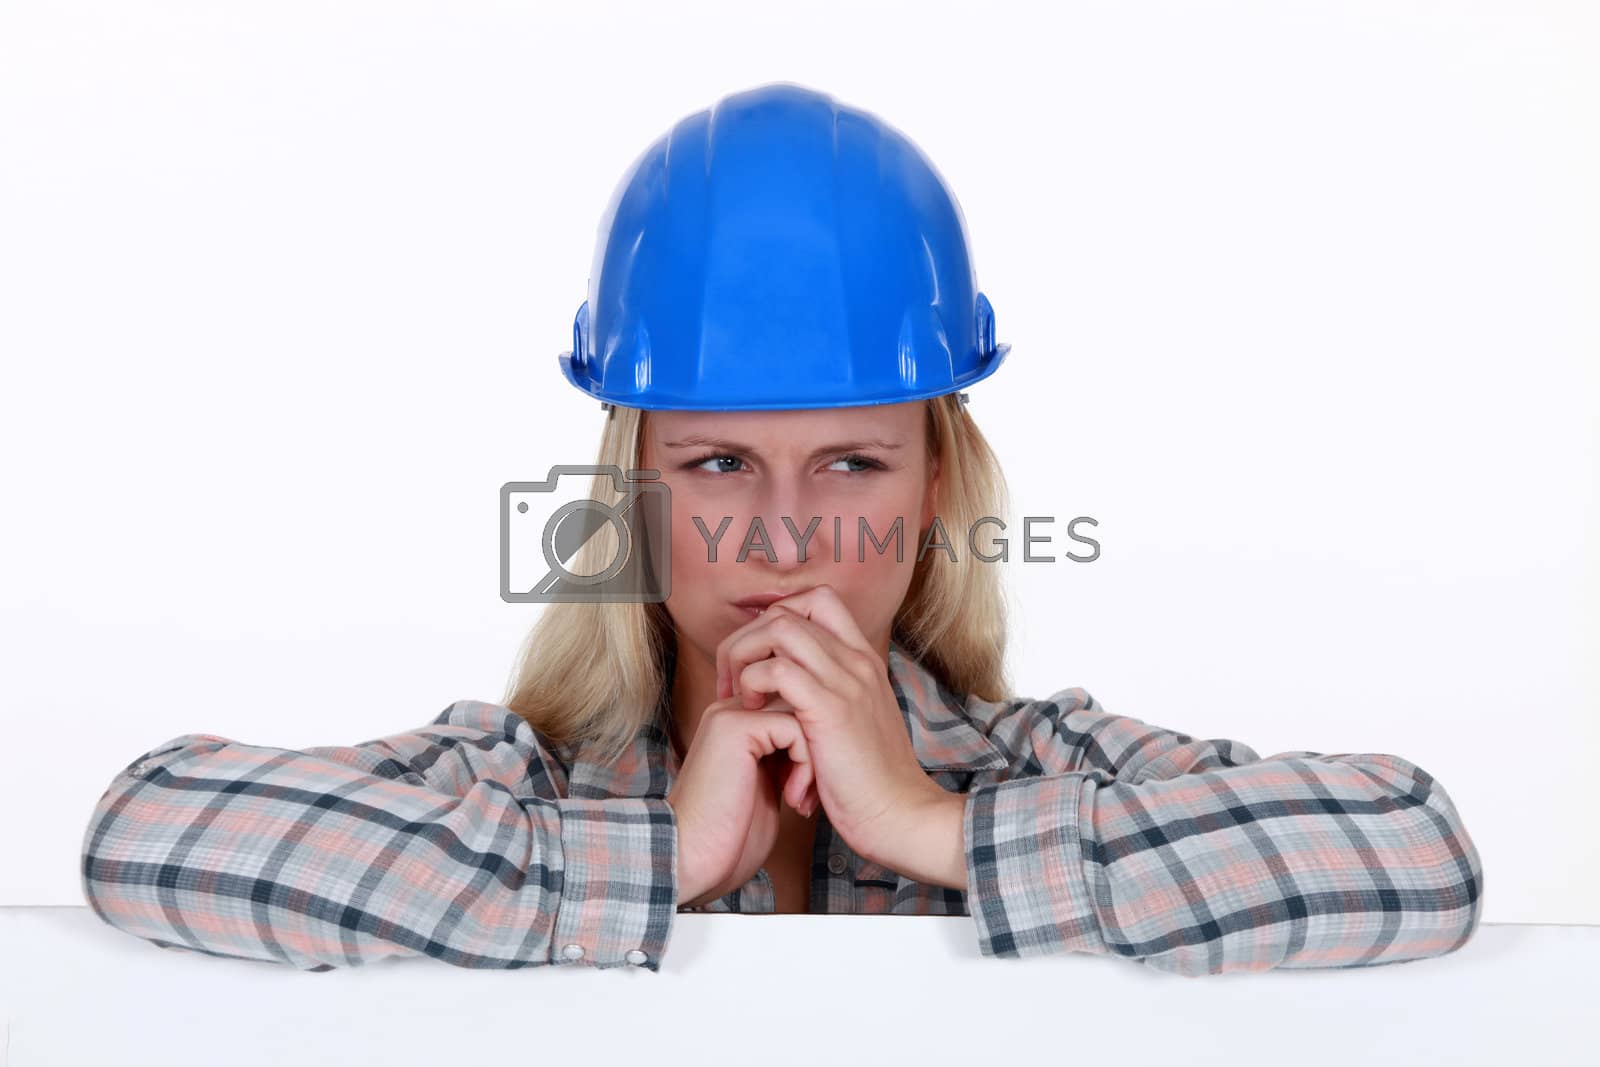 Royalty free image of Confused female laborer by phovoir